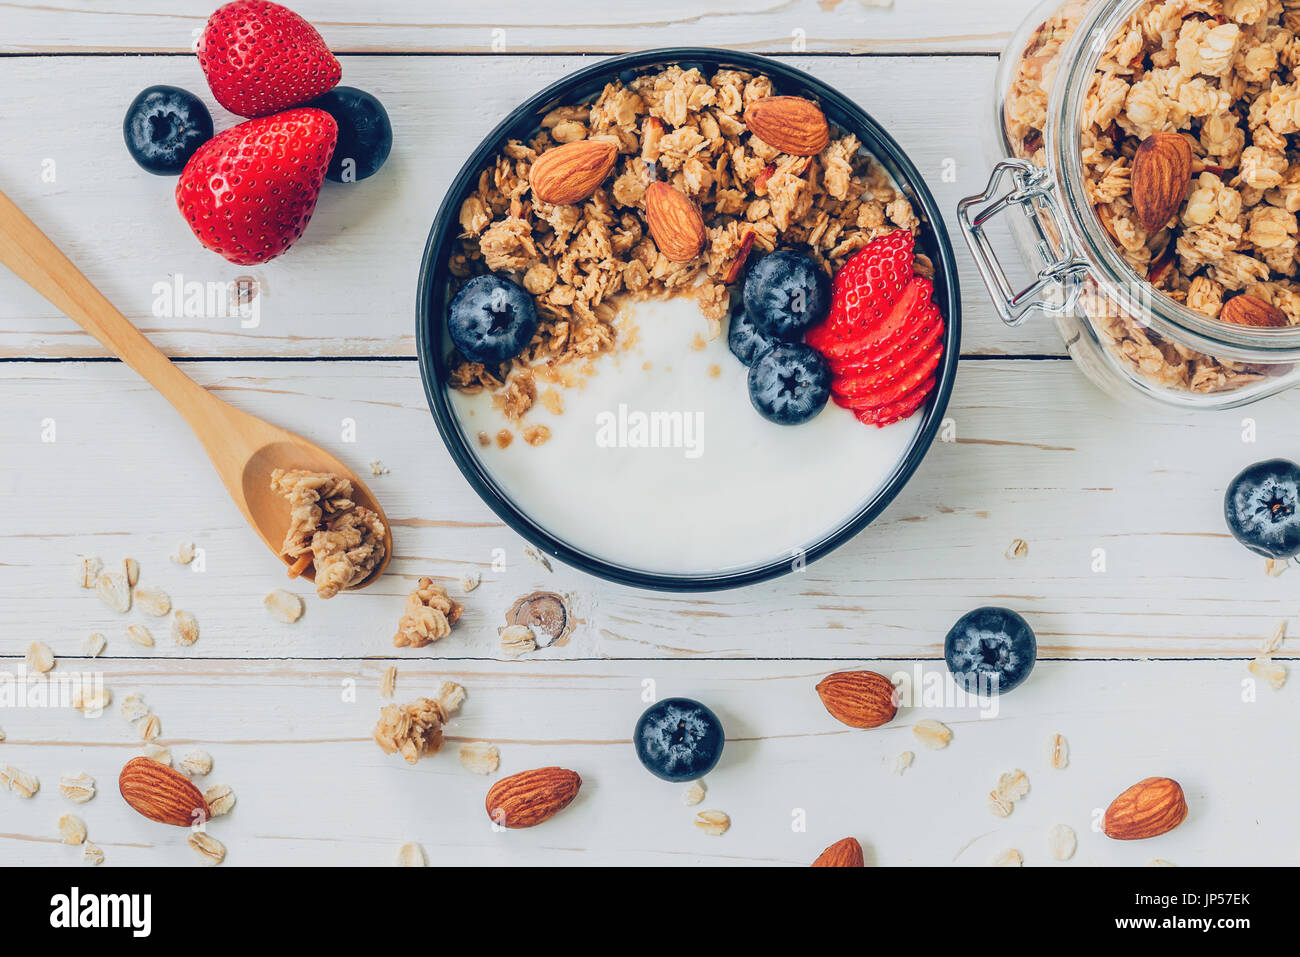 bowl of granola with yogurt, fresh berries, blueberries and nut on wood table. Stock Photo